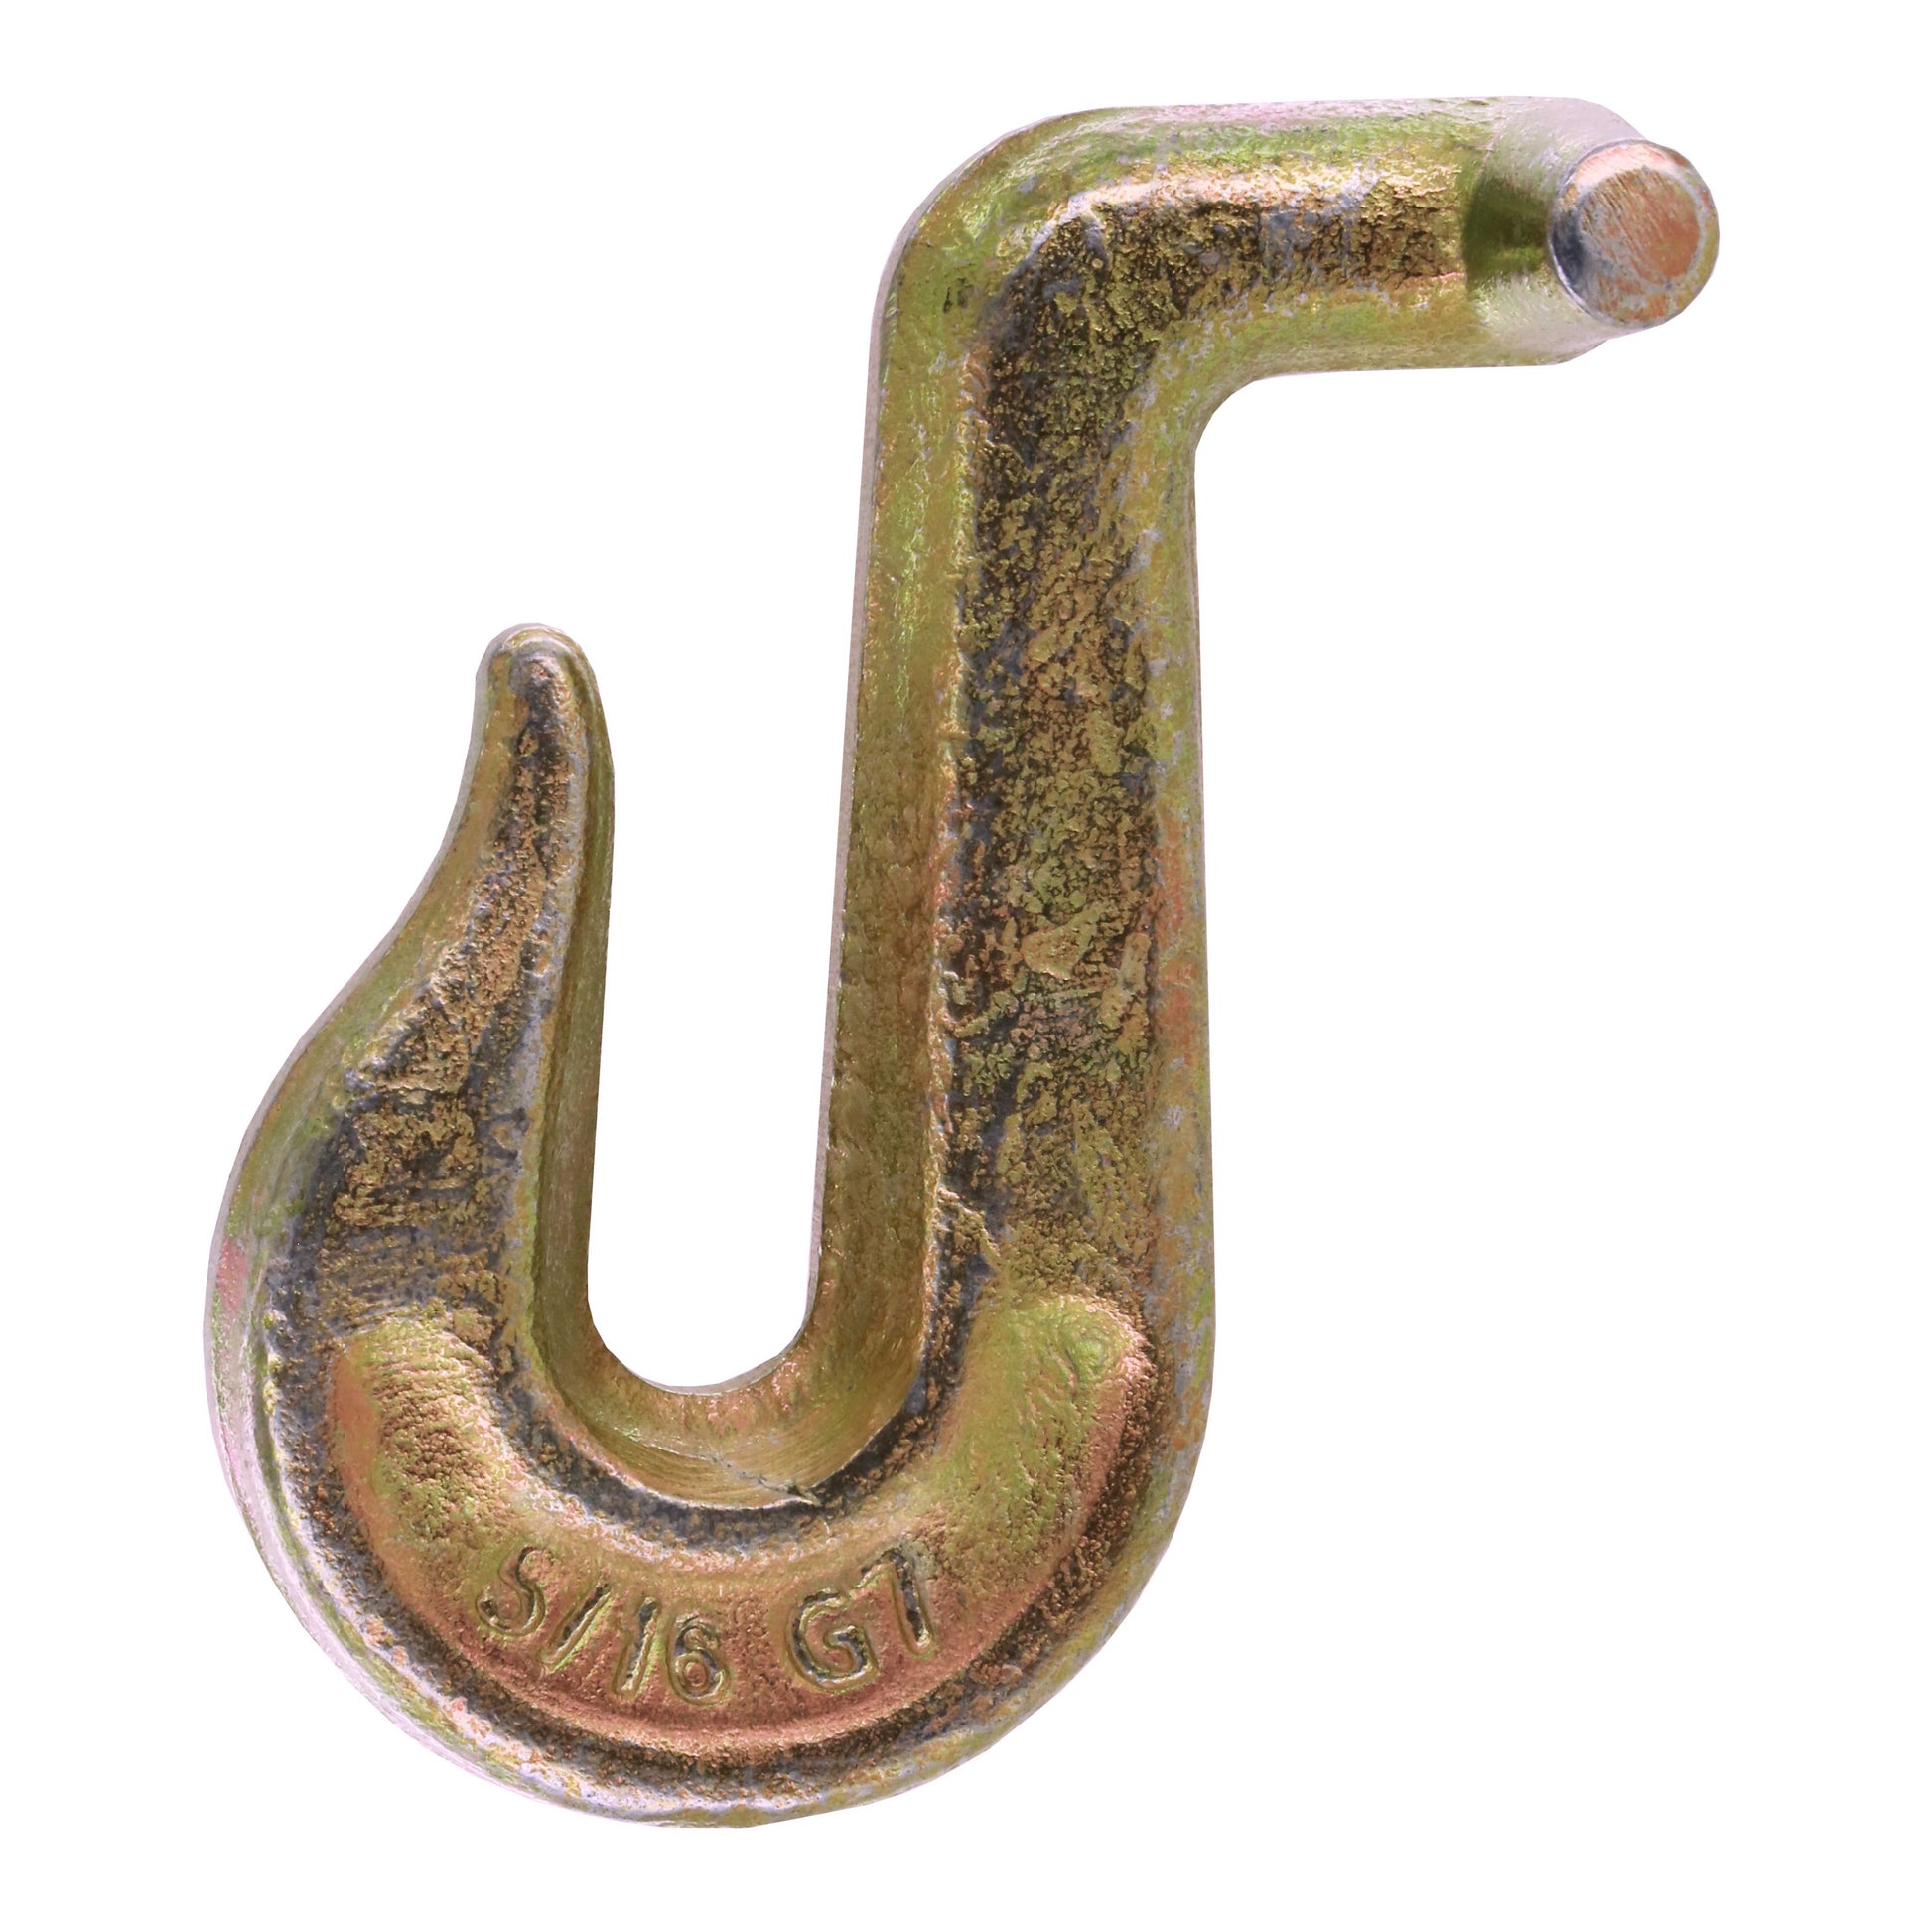 5/16 Clevis Grab Hook with Latch - Grade 70